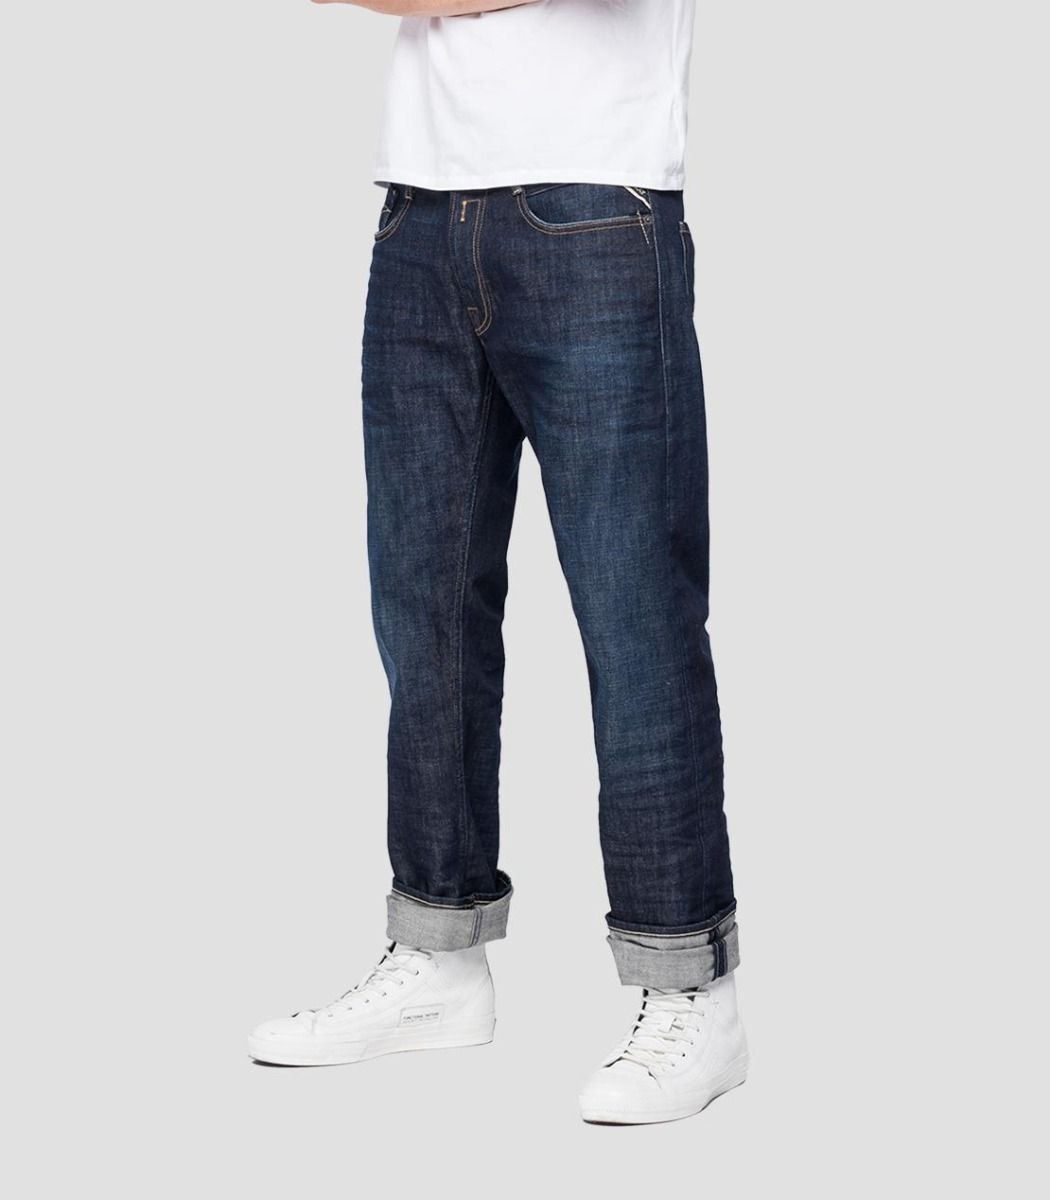 Replay M1005 Rocco Jeans Blue